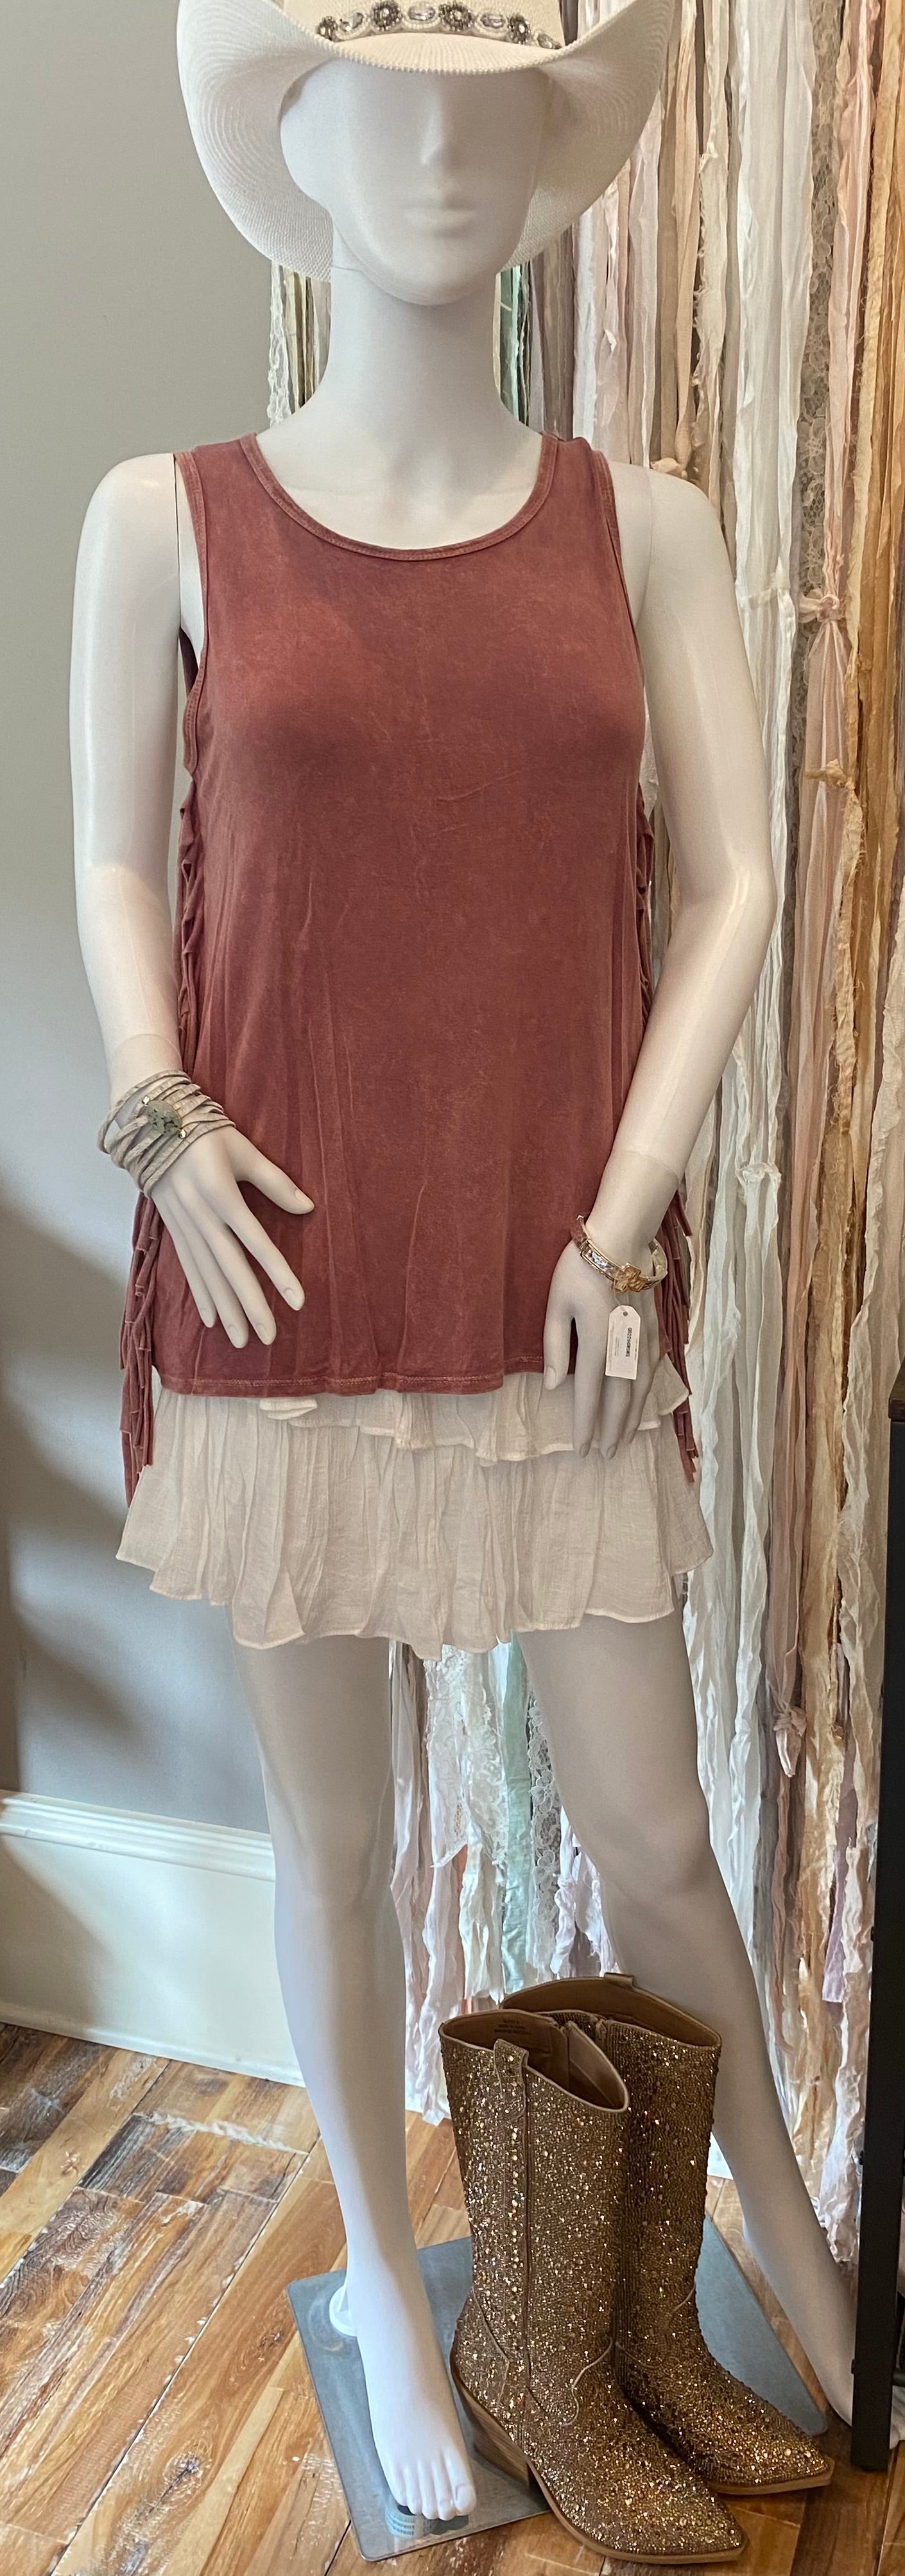 Mineral Fringed Sleeveless Top